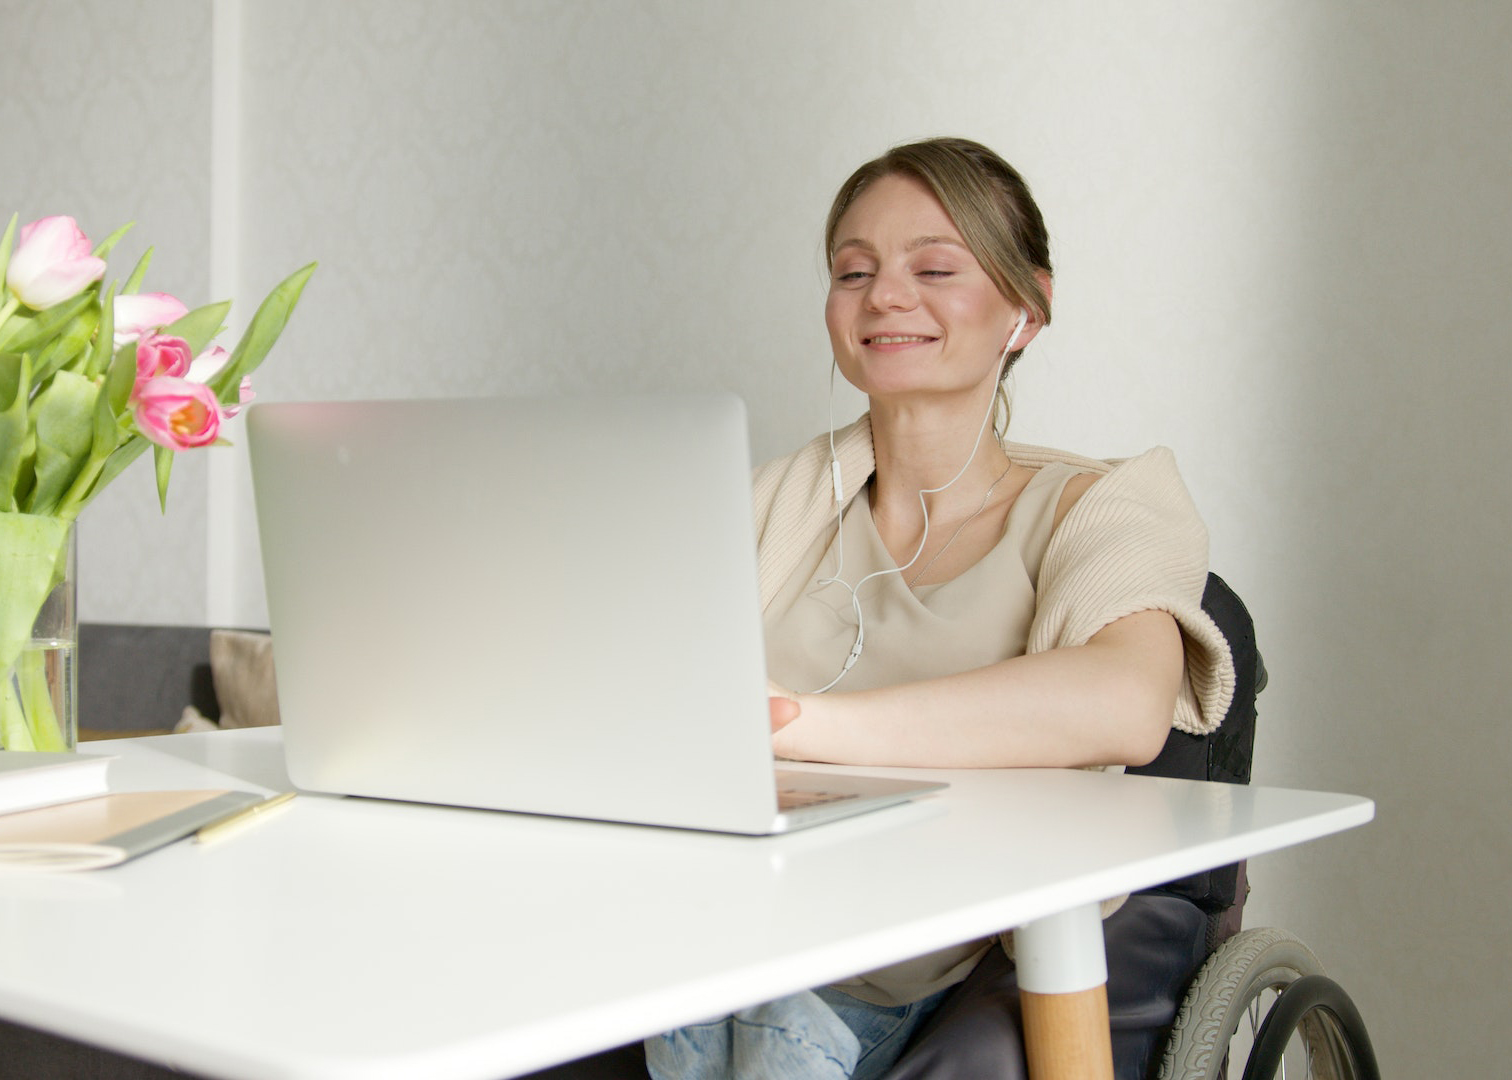 A woman in a wheelchair wearing earbuds smiles as she watches an online course on her computer